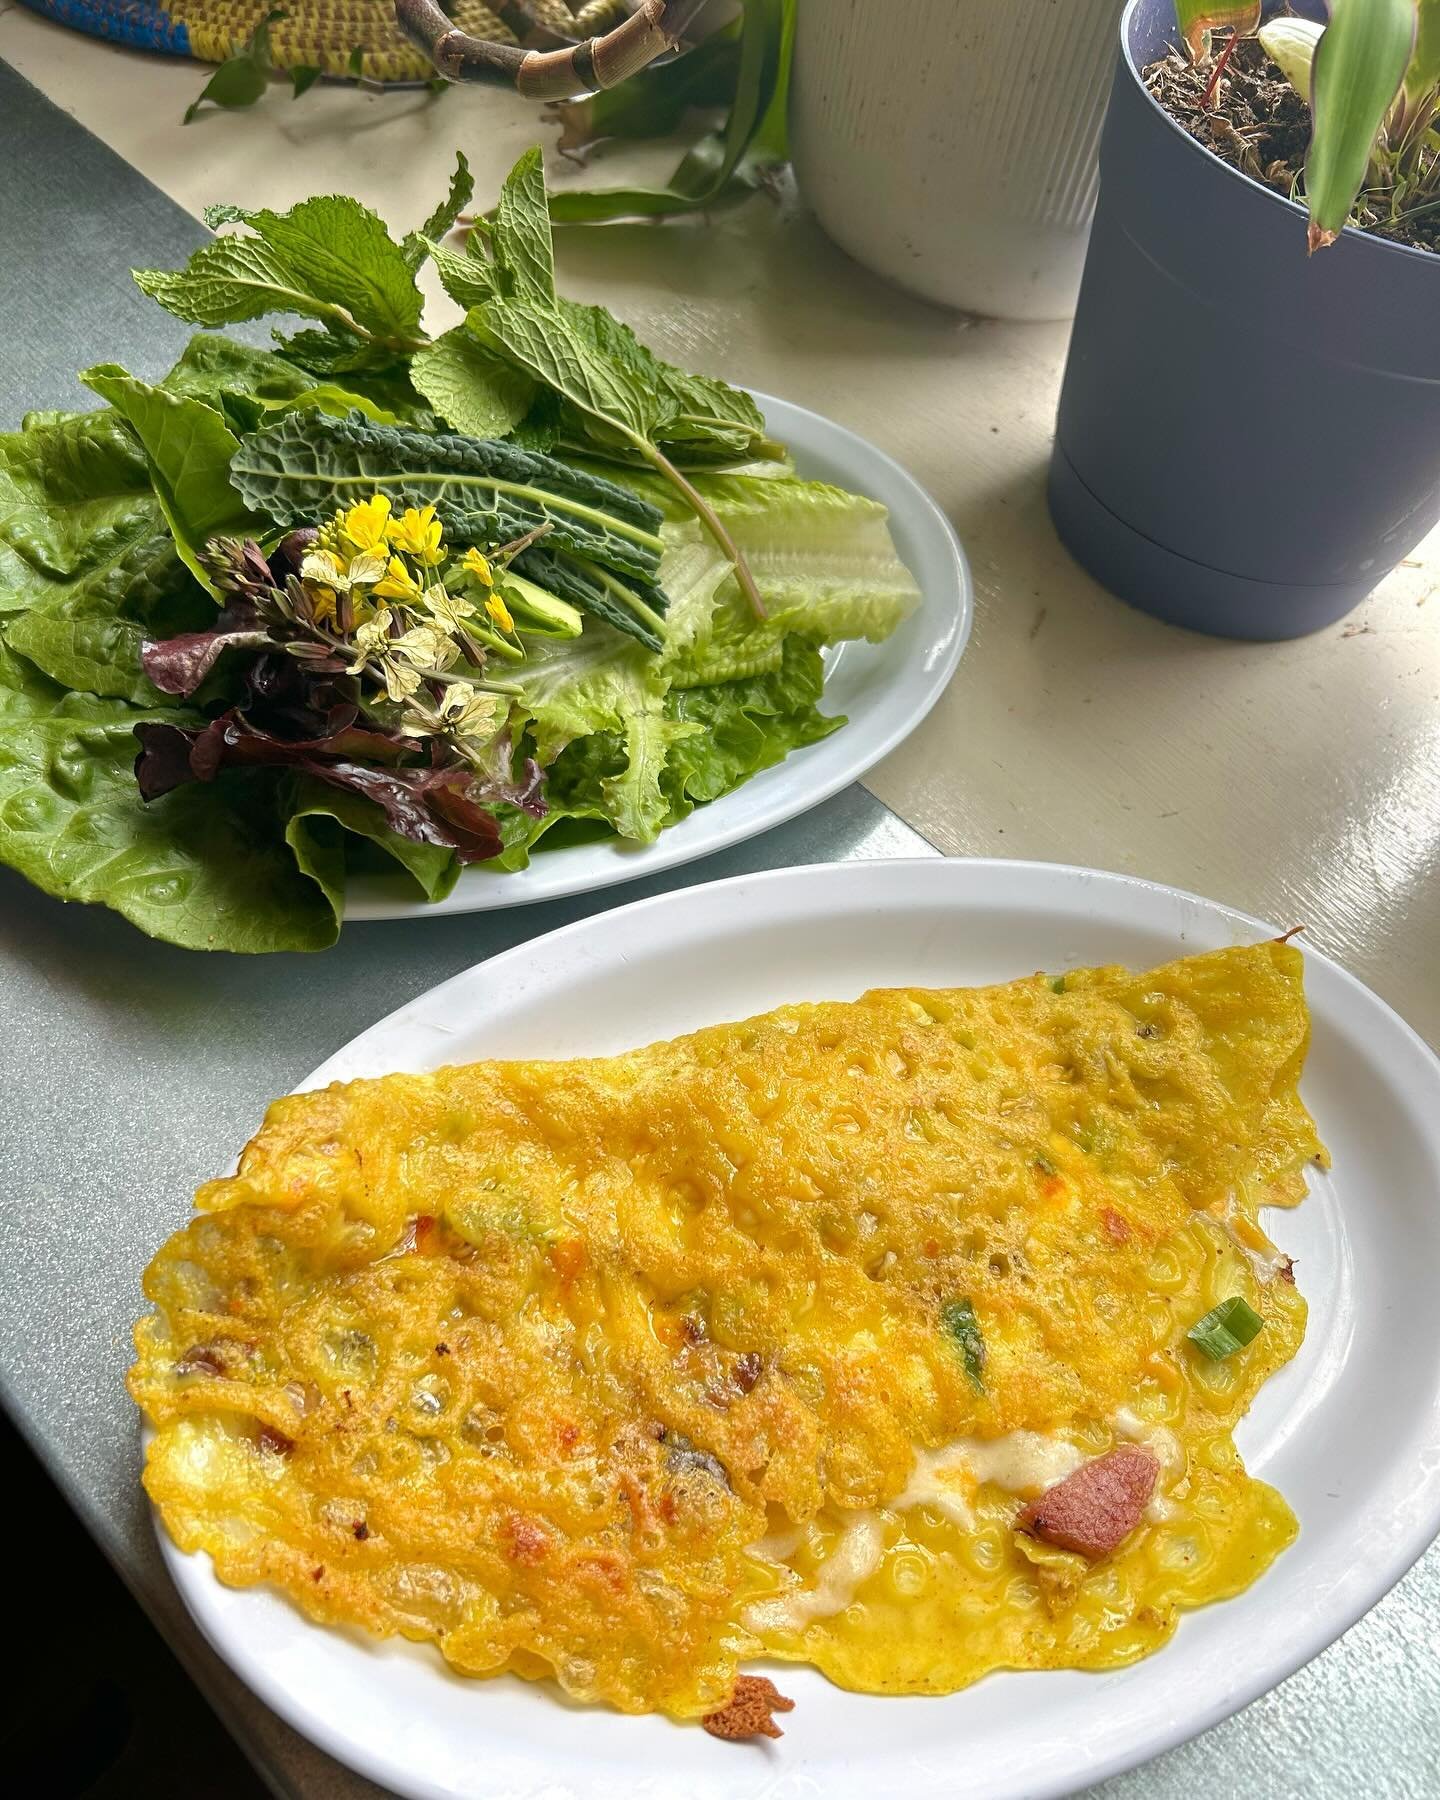 our breakfast b&aacute;nh x&egrave;o&hellip; think of it like a civil union between a bacon egg &amp; cheese and a classic b&aacute;nh x&egrave;o. or, a crispy fried rice flour &amp; coconut milk crepe stuffed with bacon, egg and cheese, and served w